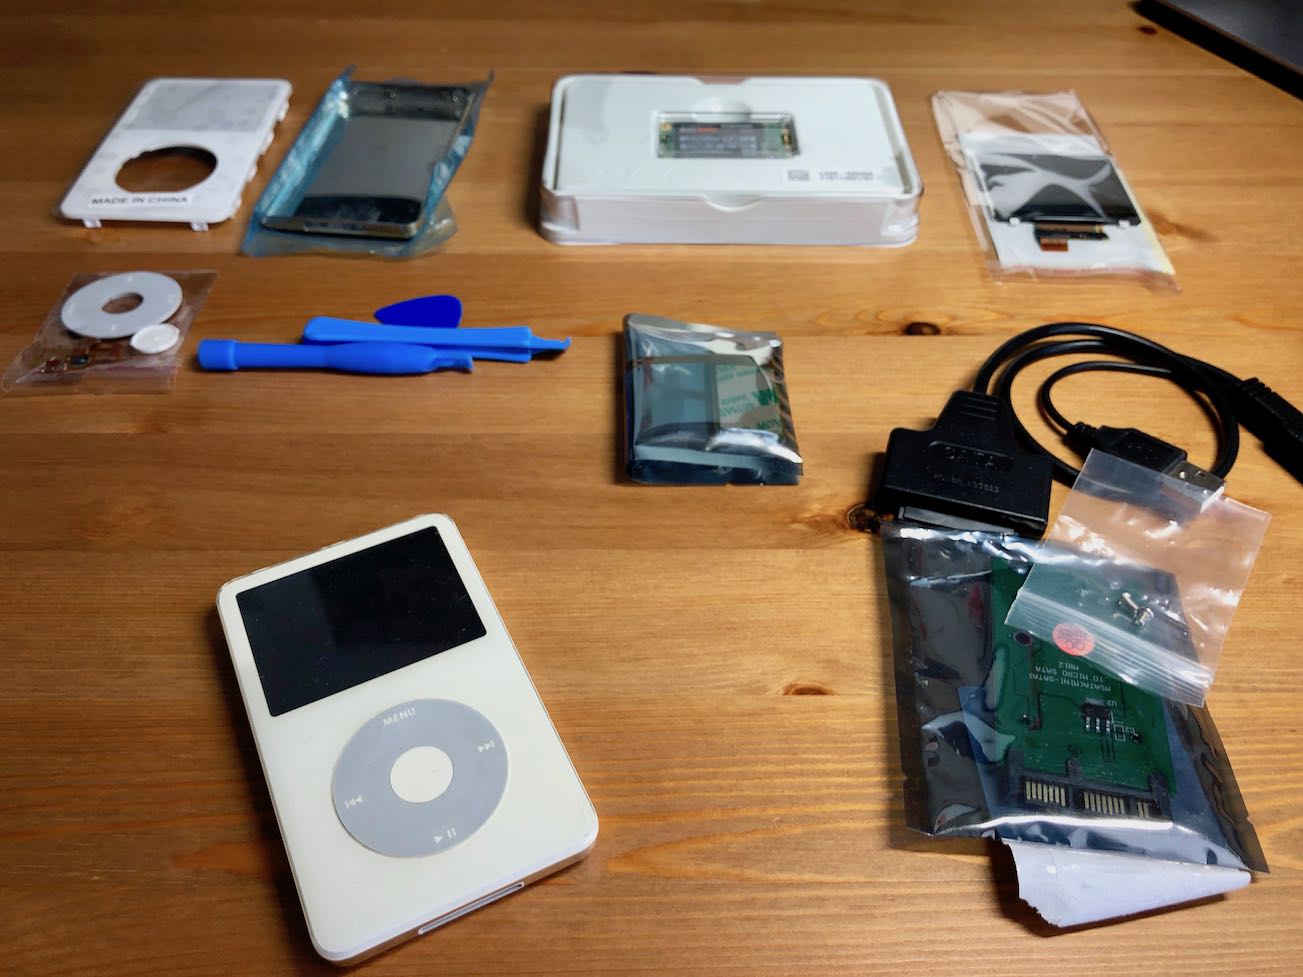 My old iPod Video beside the various replacement components